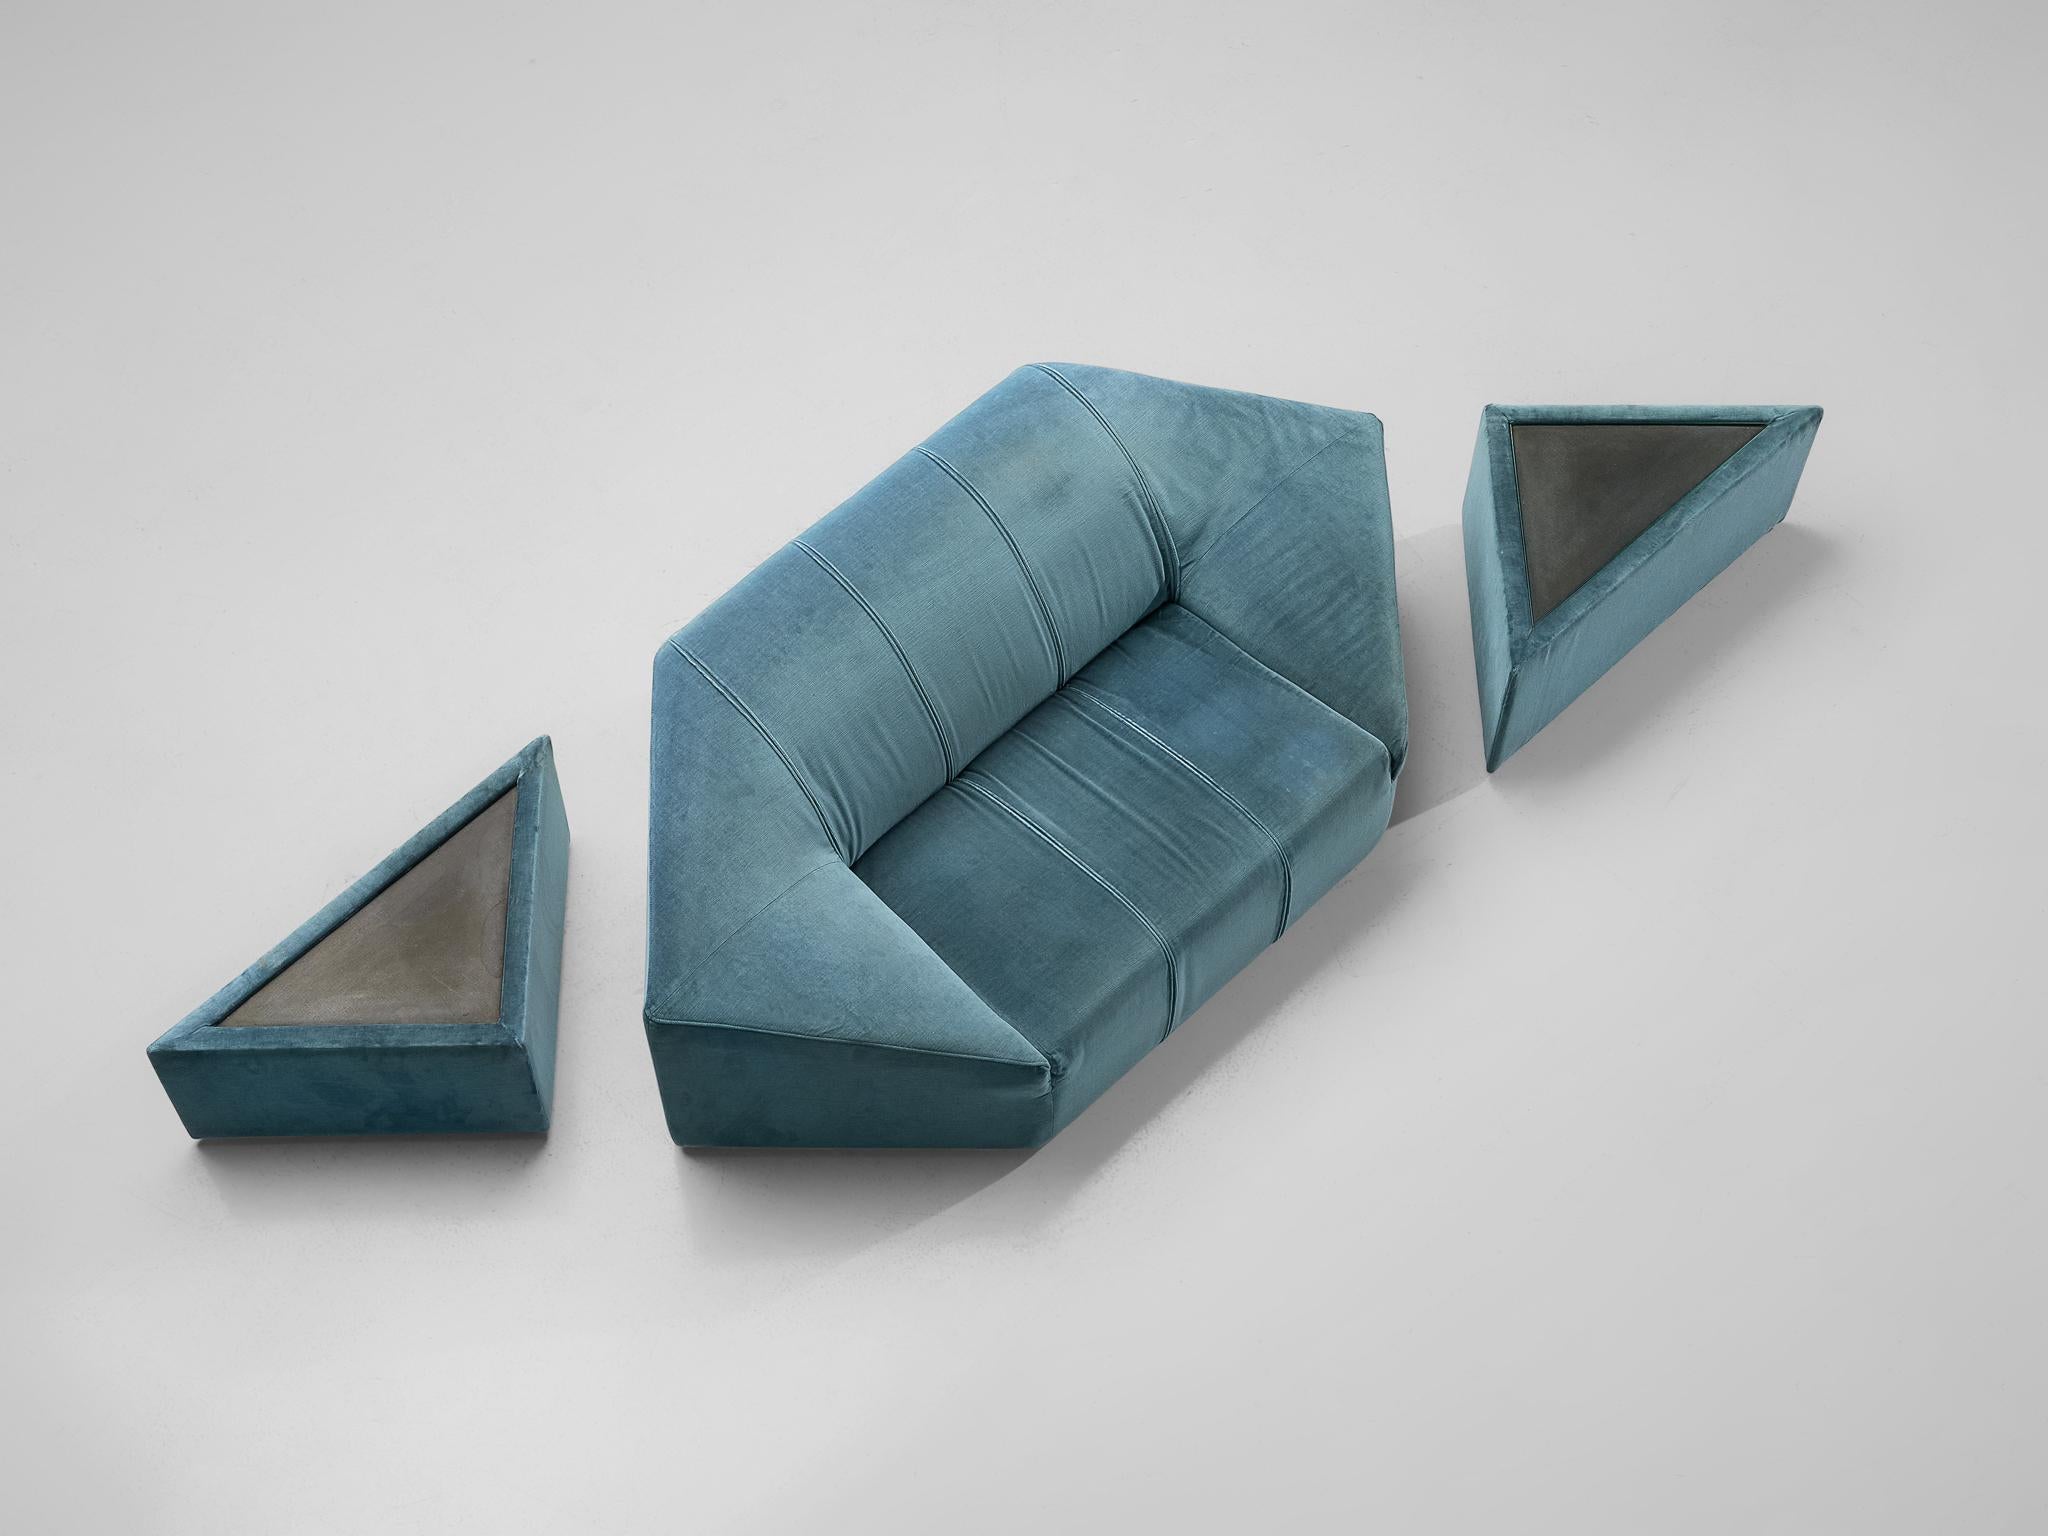 Two-seat sofa with pair of side tables, aquamarine velour upholstery, Italy, 1960s.

Extravagant sofa in spectacular hexagonal shape. The Italian two-seat sofa has a solid base of which the backrest rises diagonally. This results in large and wide